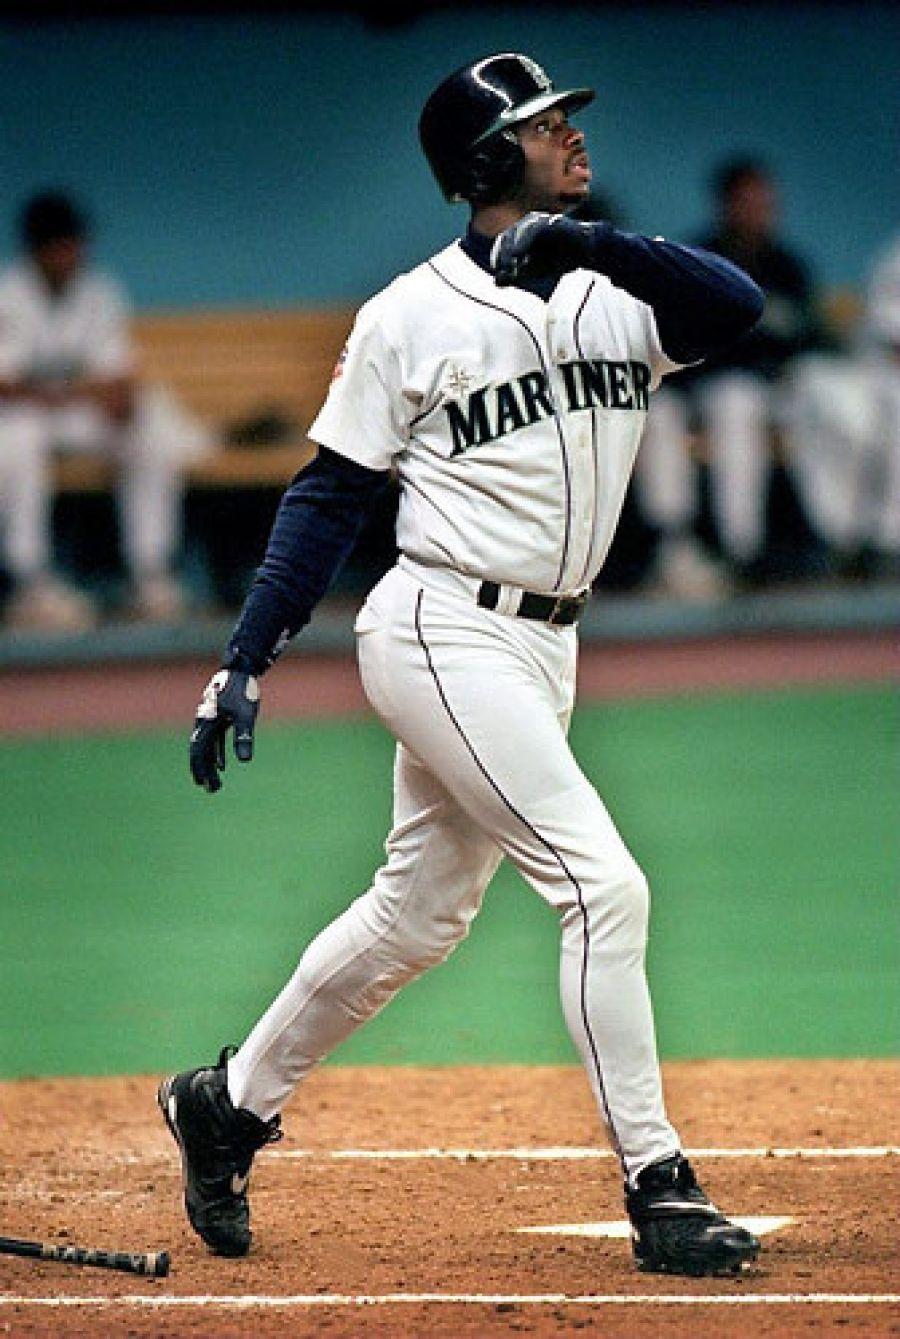 Today in Ken Griffey Jr Hit His 55th Home Run of the Season